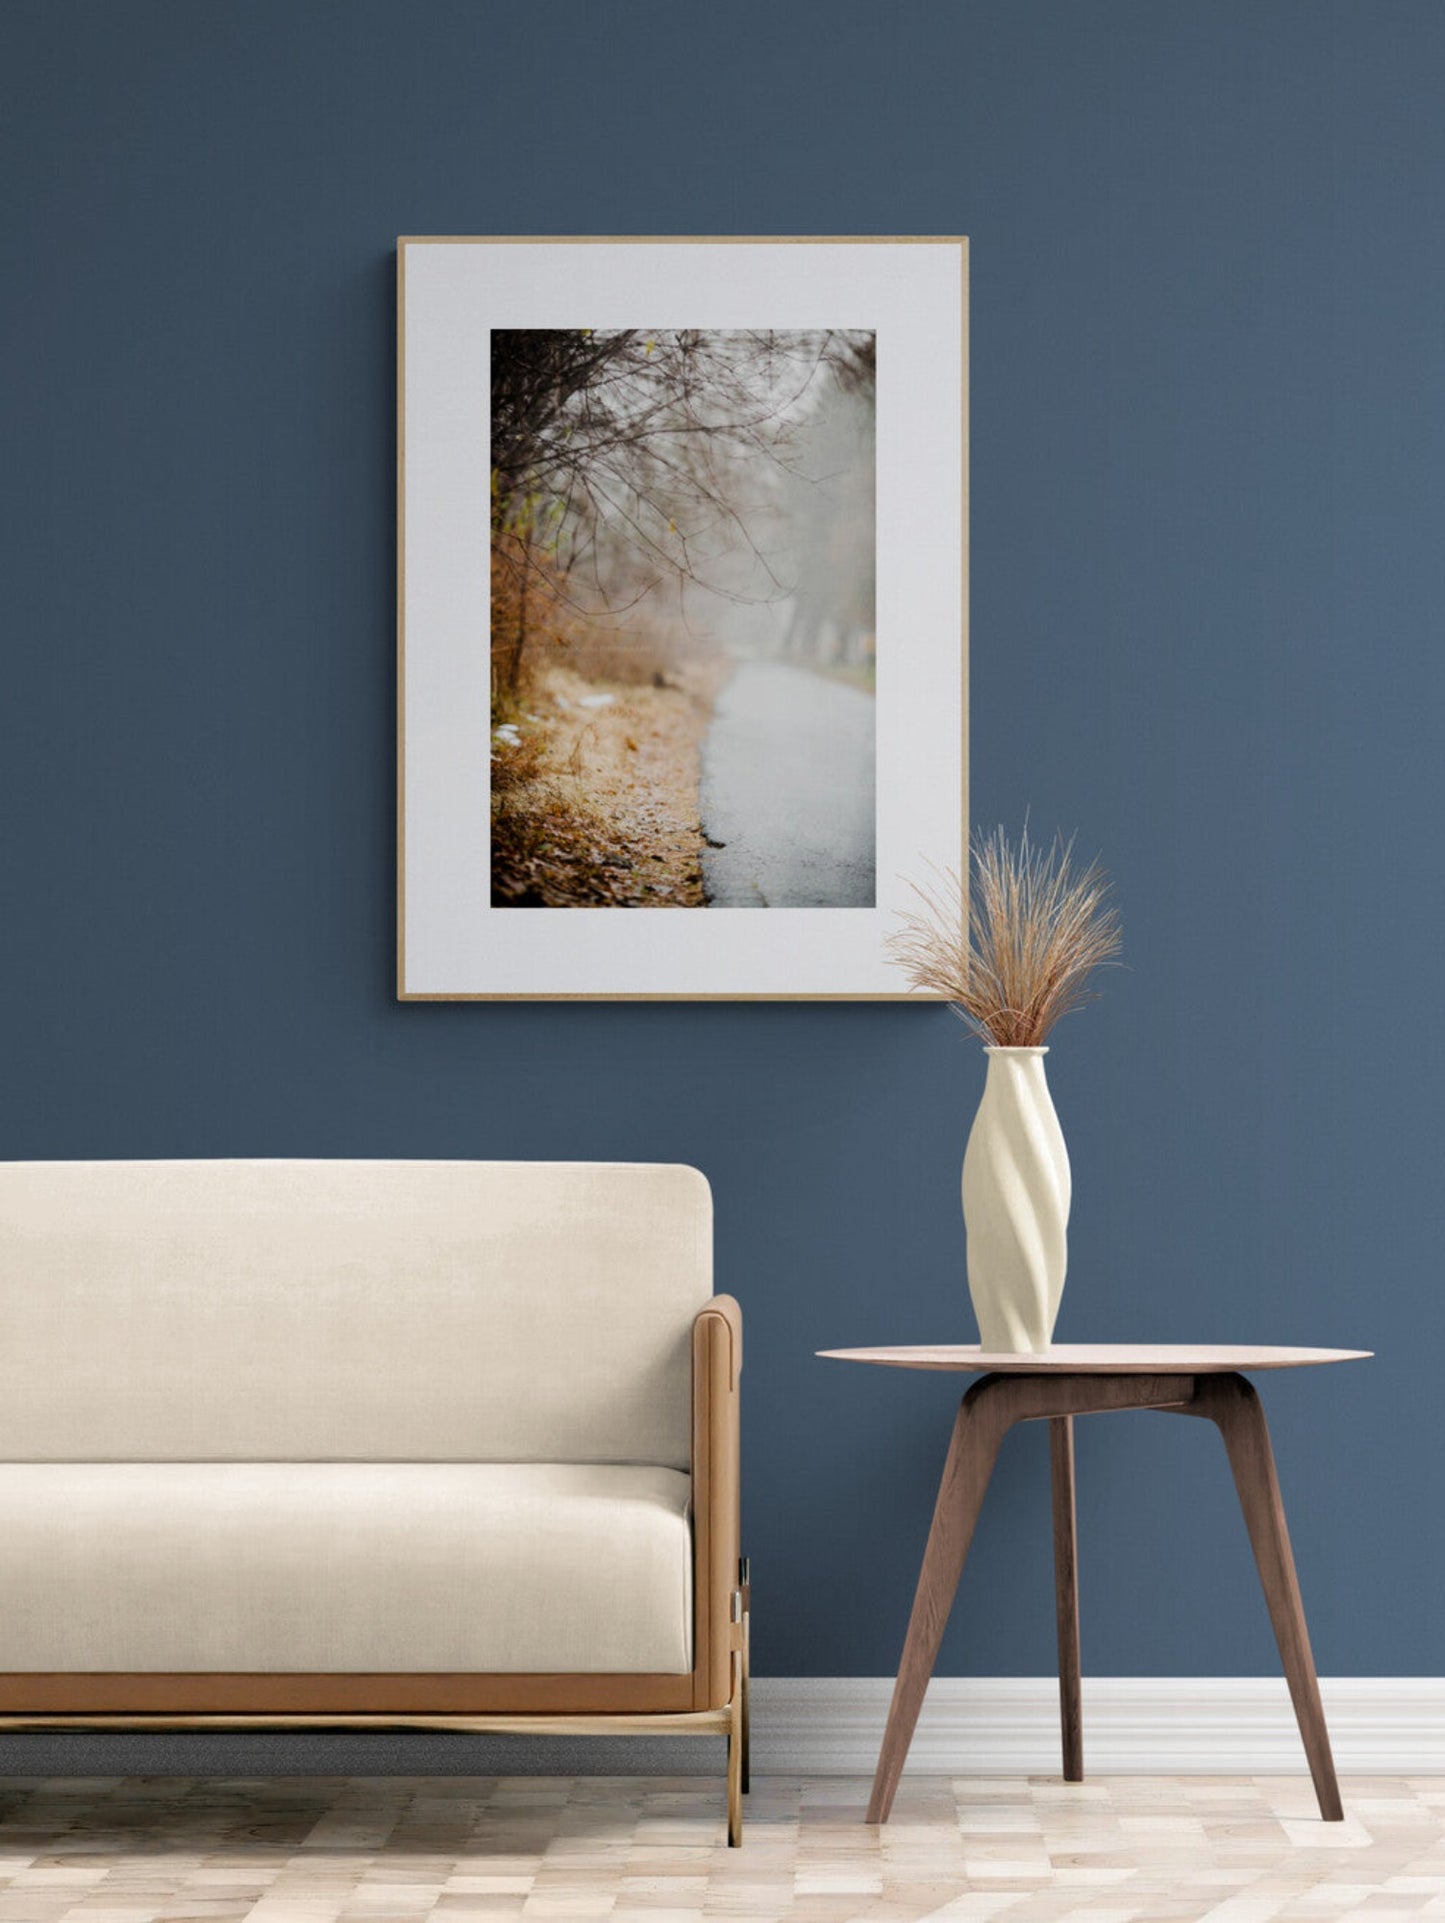 Foggy Winter Road Photograph print as wall art in a living room